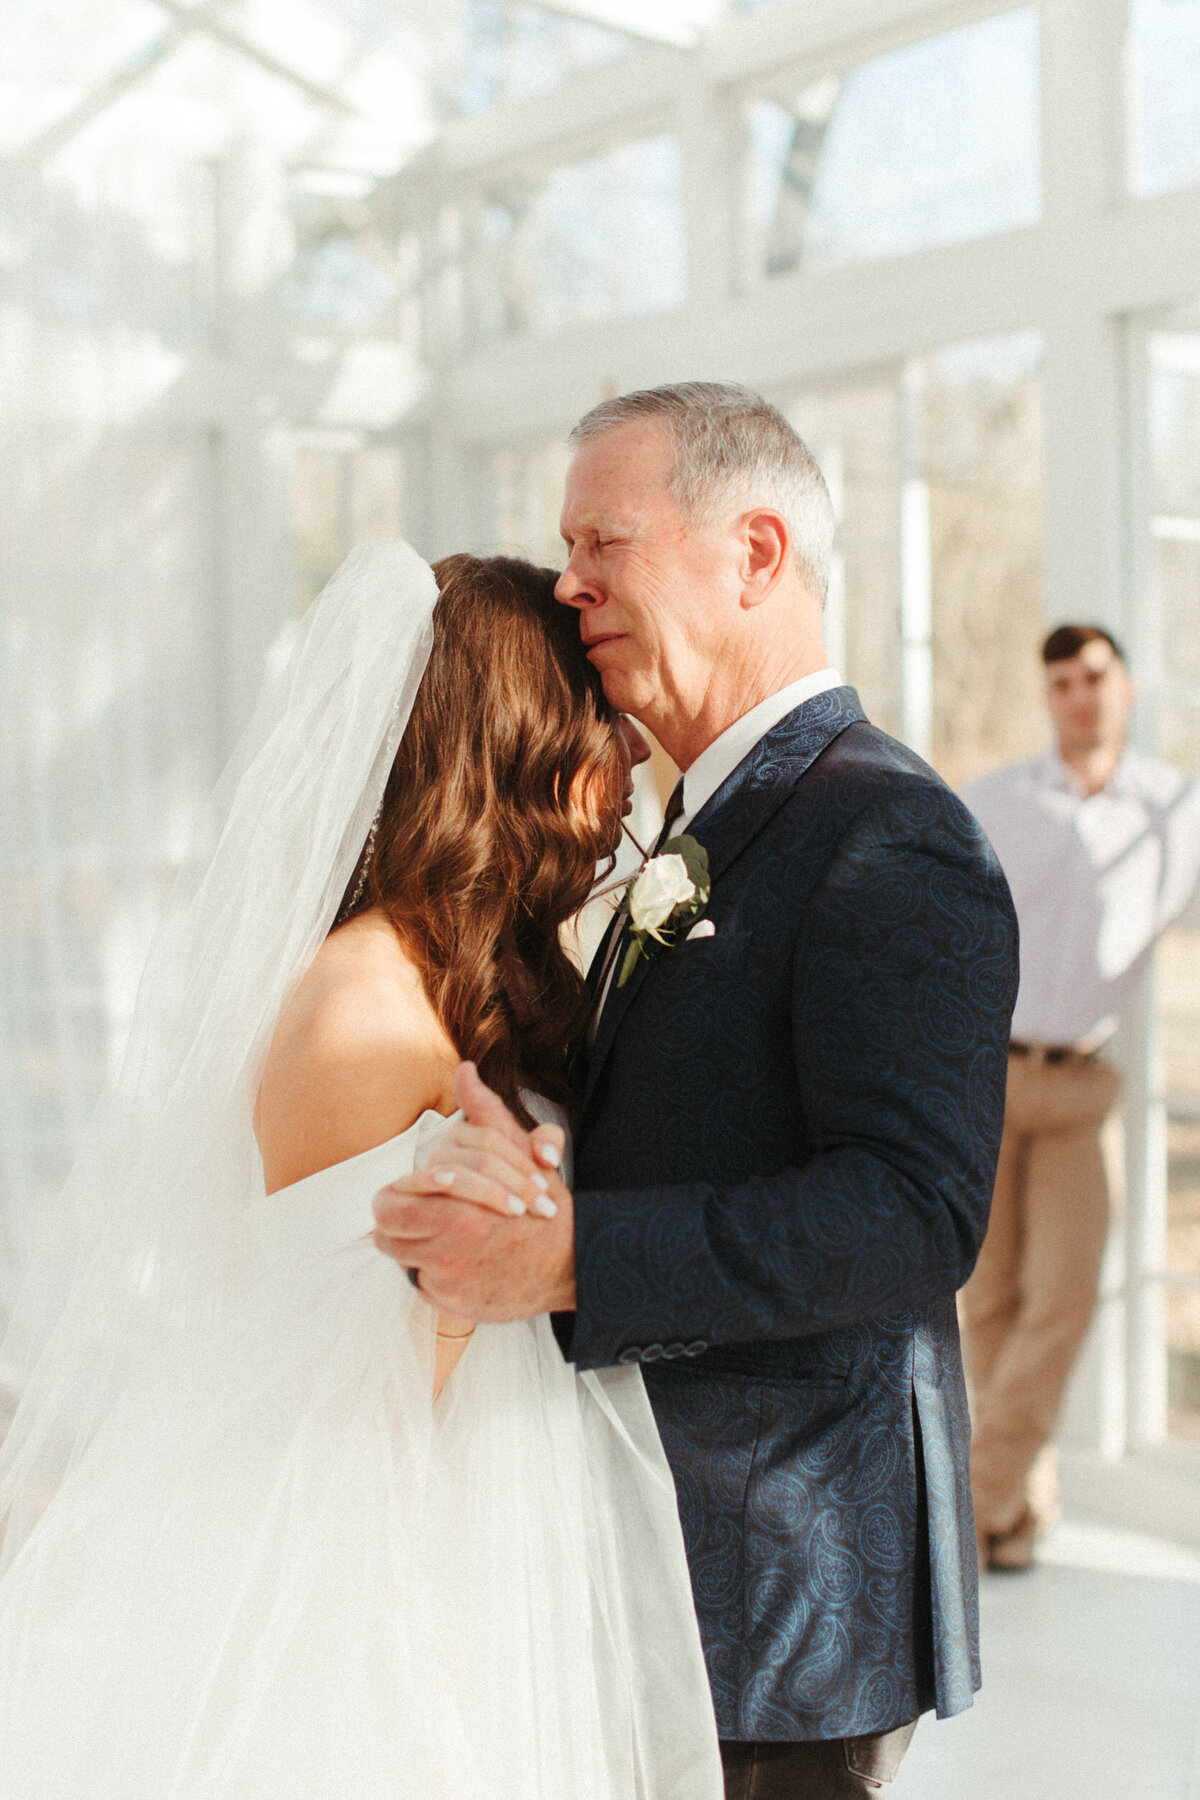 Emotional moment of the father of the bride crying during the father-daughter dance